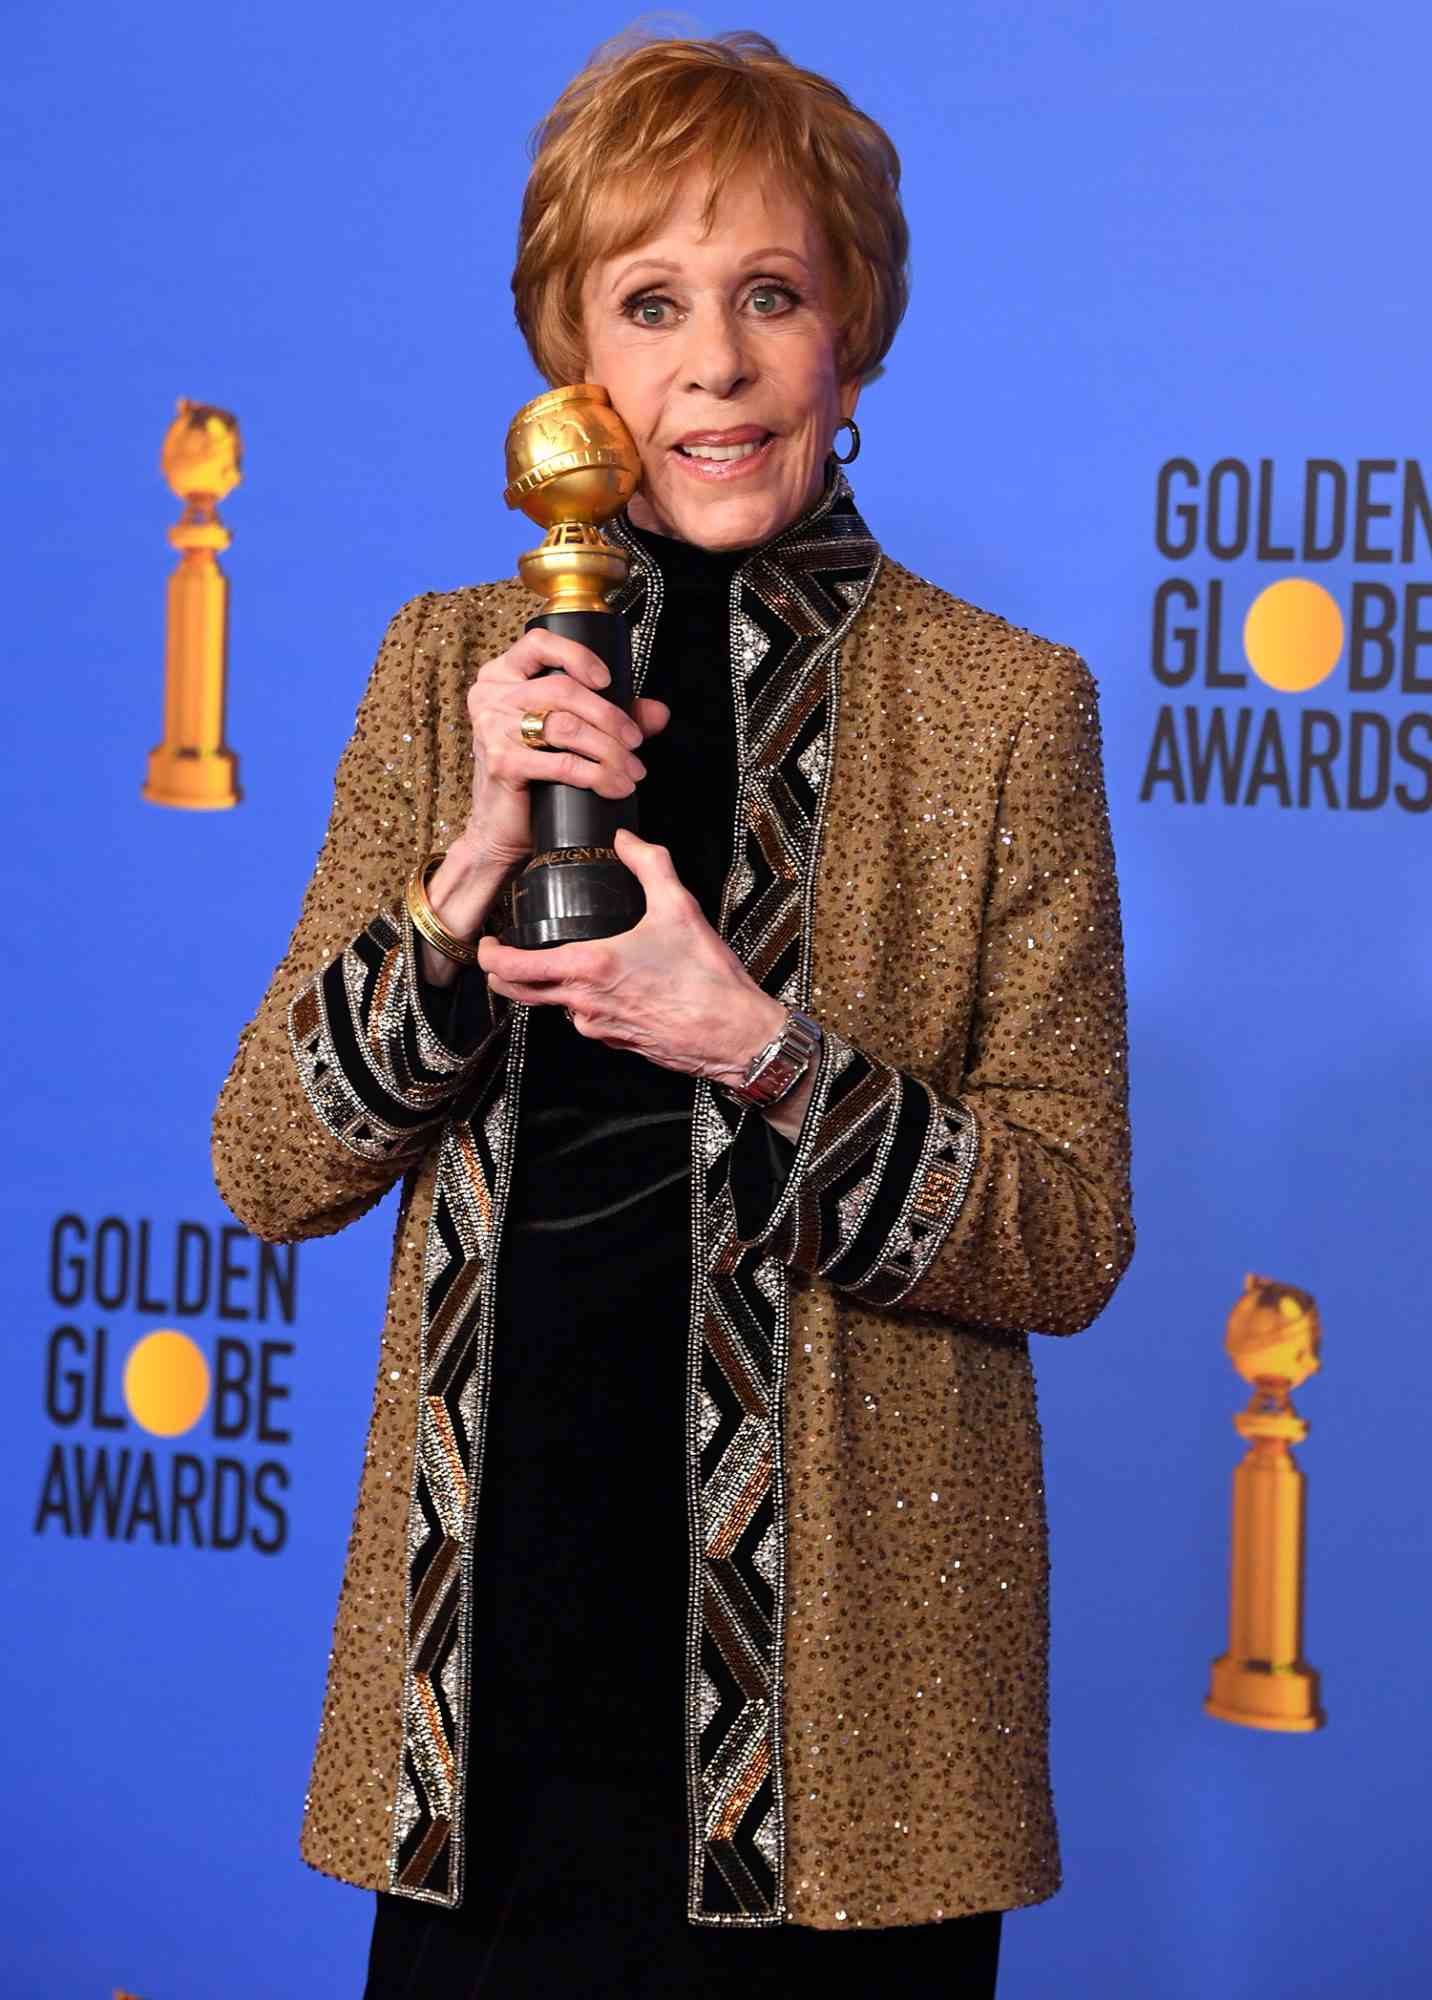 Carol Burnett poses with the trophy during the 76th annual Golden Globe Awards